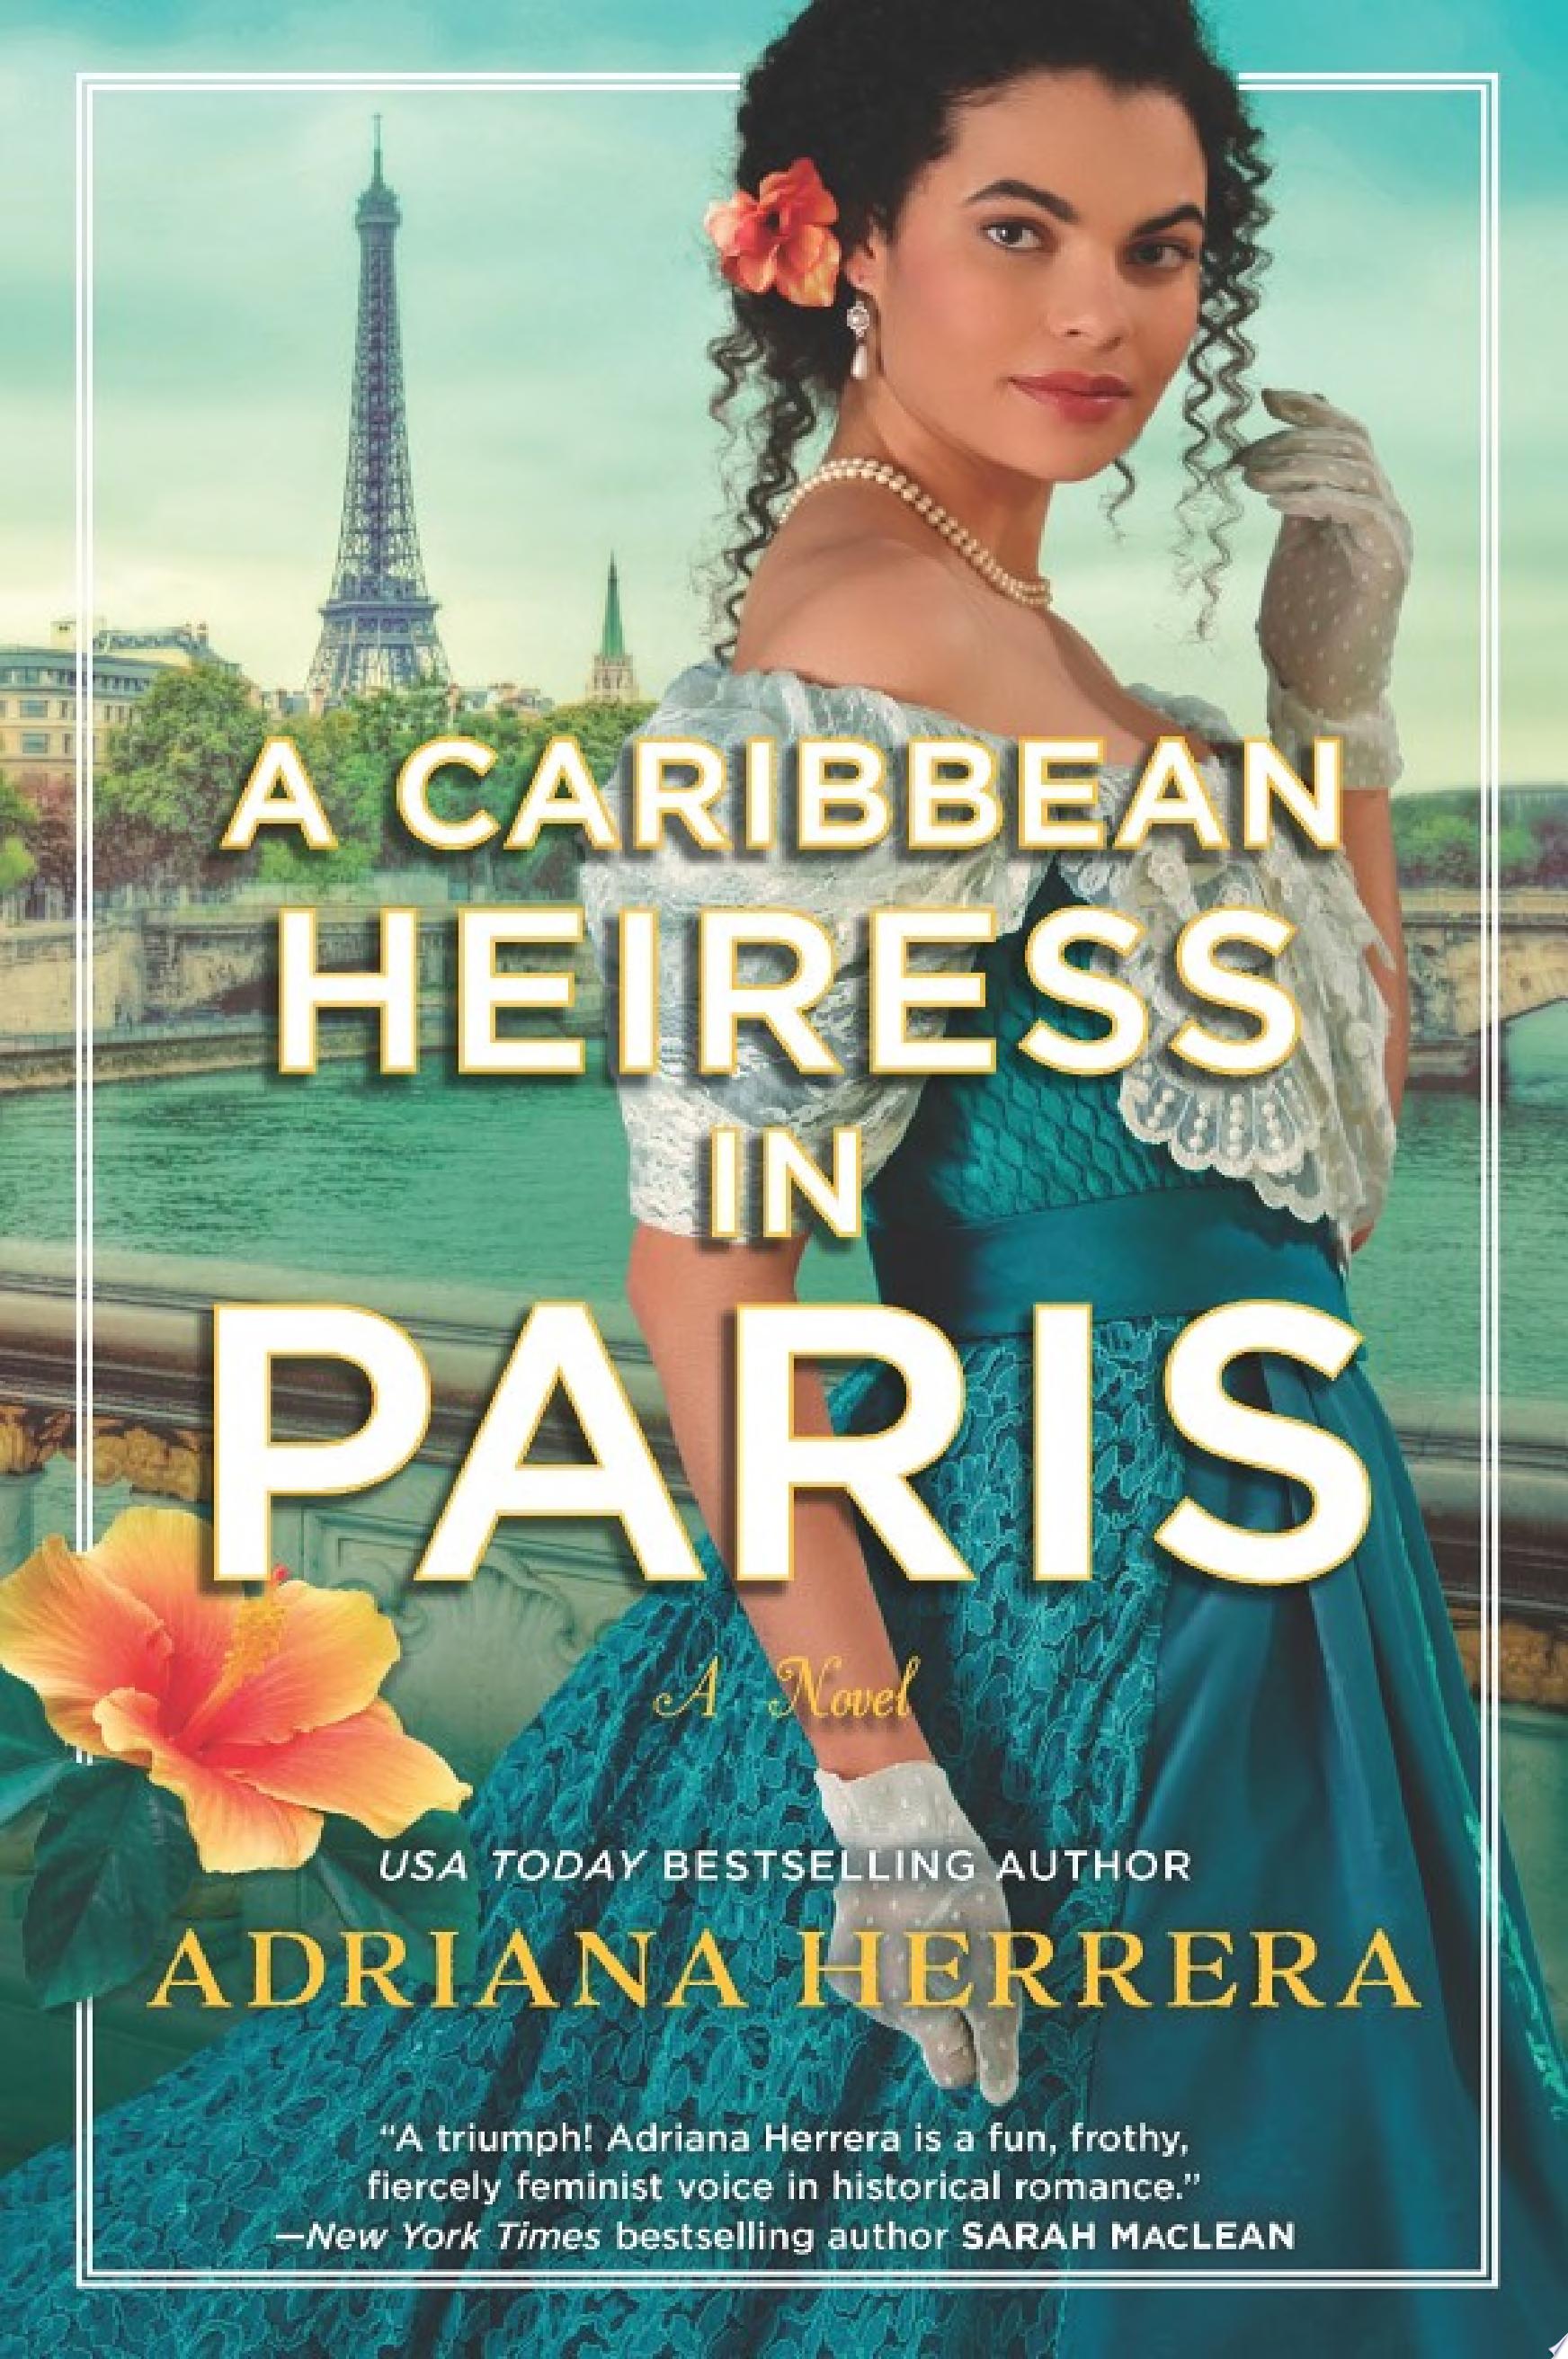 Image for "A Caribbean Heiress in Paris"